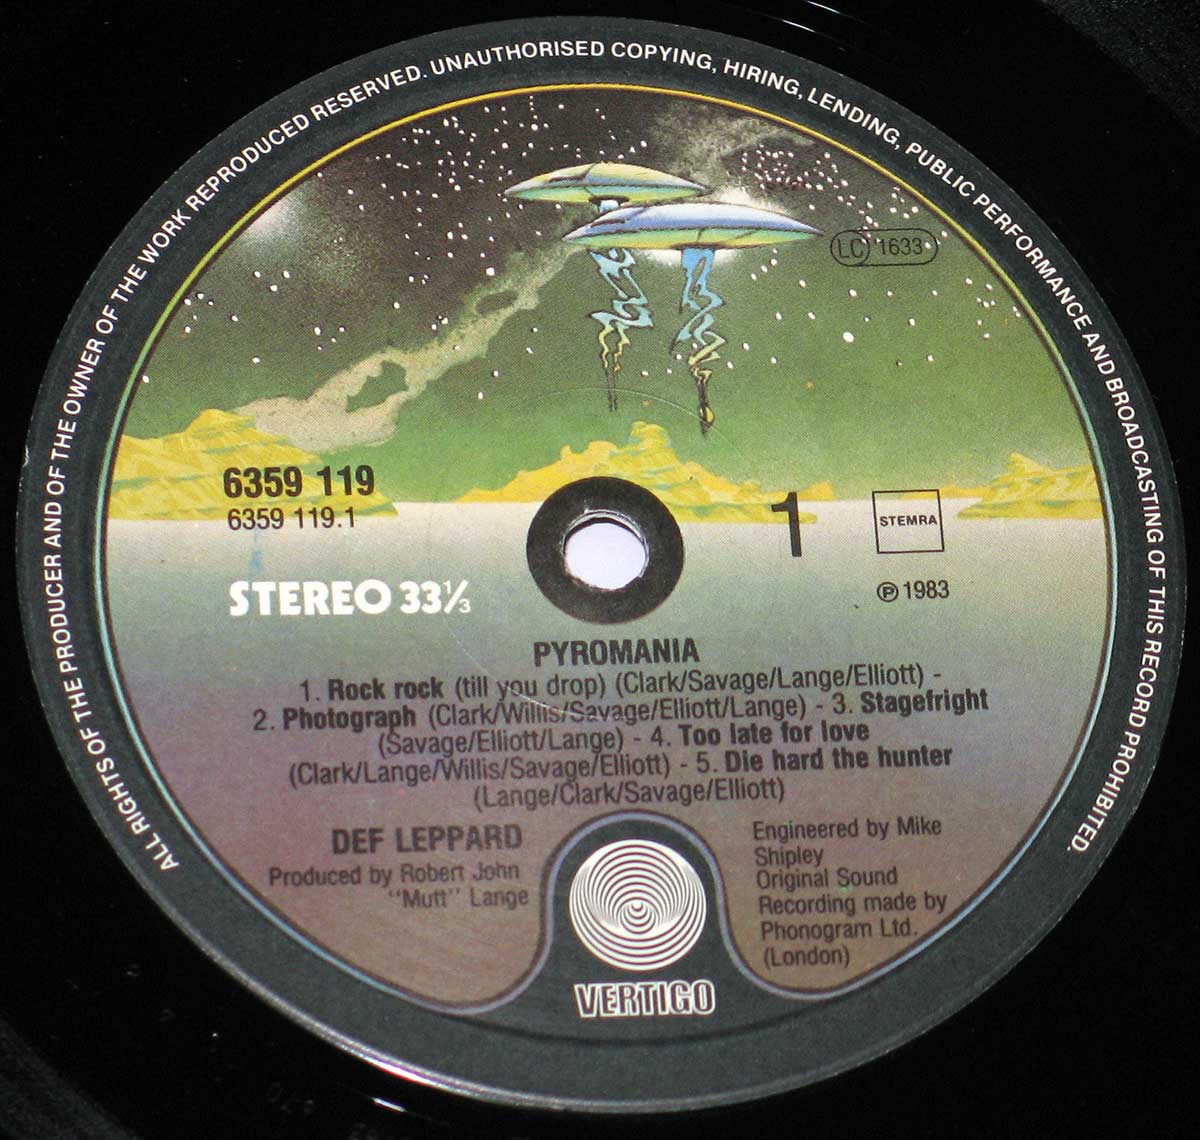 Close up of record's label Def Leppard Pyromania ( Netherlands ) 12" Vinyl LP Album  Side One